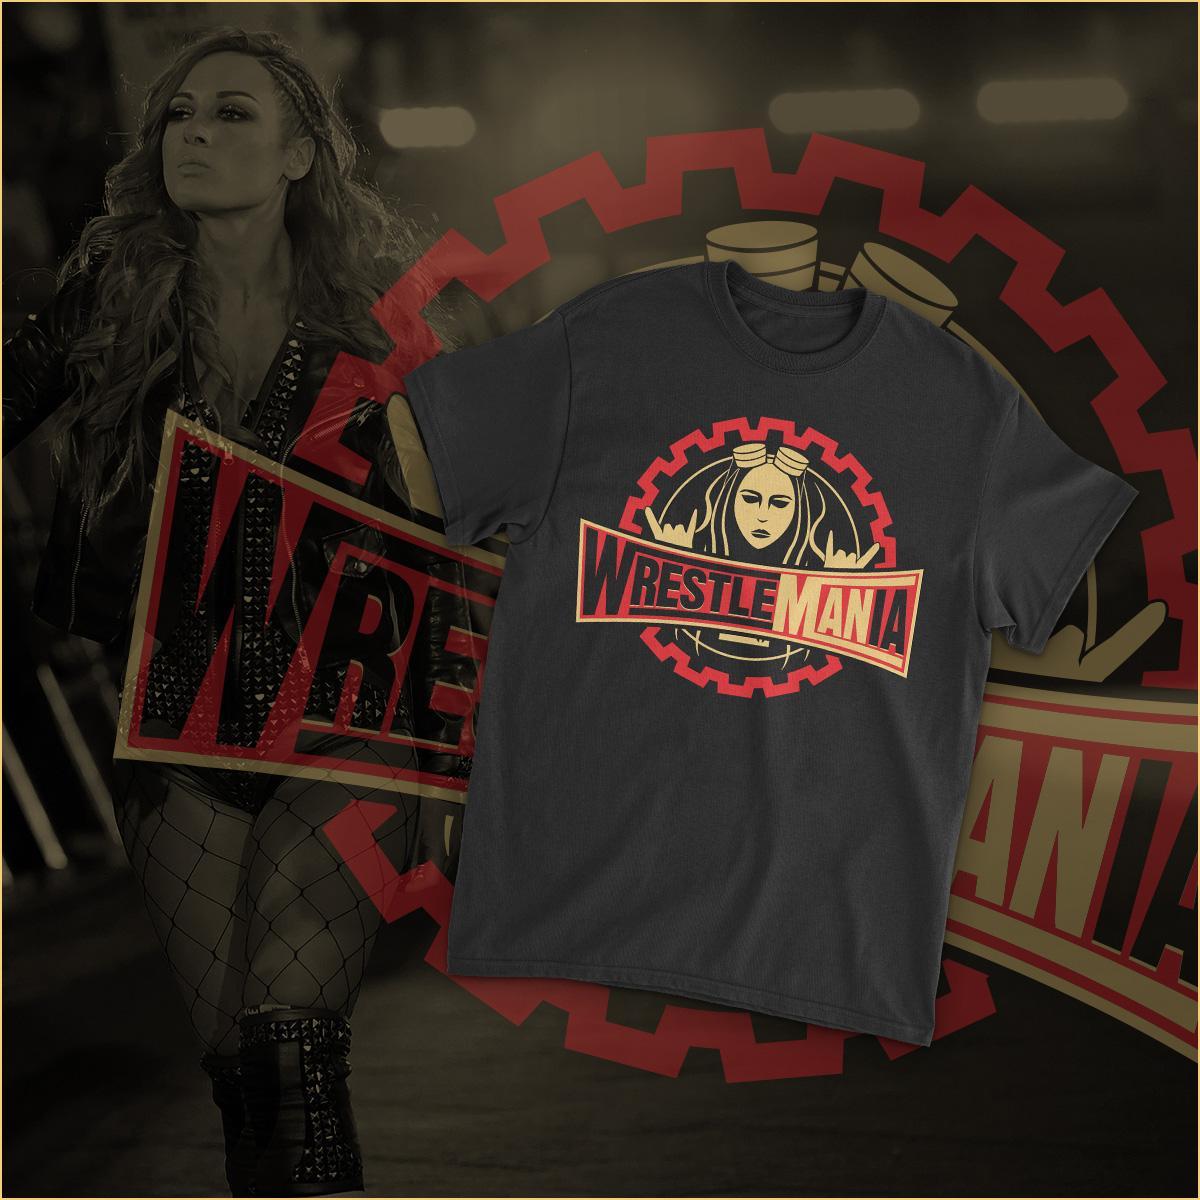 WWEShop.com on Twitter: "The Road to #WrestleMANia has begun! Get your  @BeckyLynchWWE t-shirt at #WWEShop today. #WWE #SDLive #BeckyLynch #TheMan  https://t.co/JROvSxUg9P… https://t.co/RdnzWNE3my"